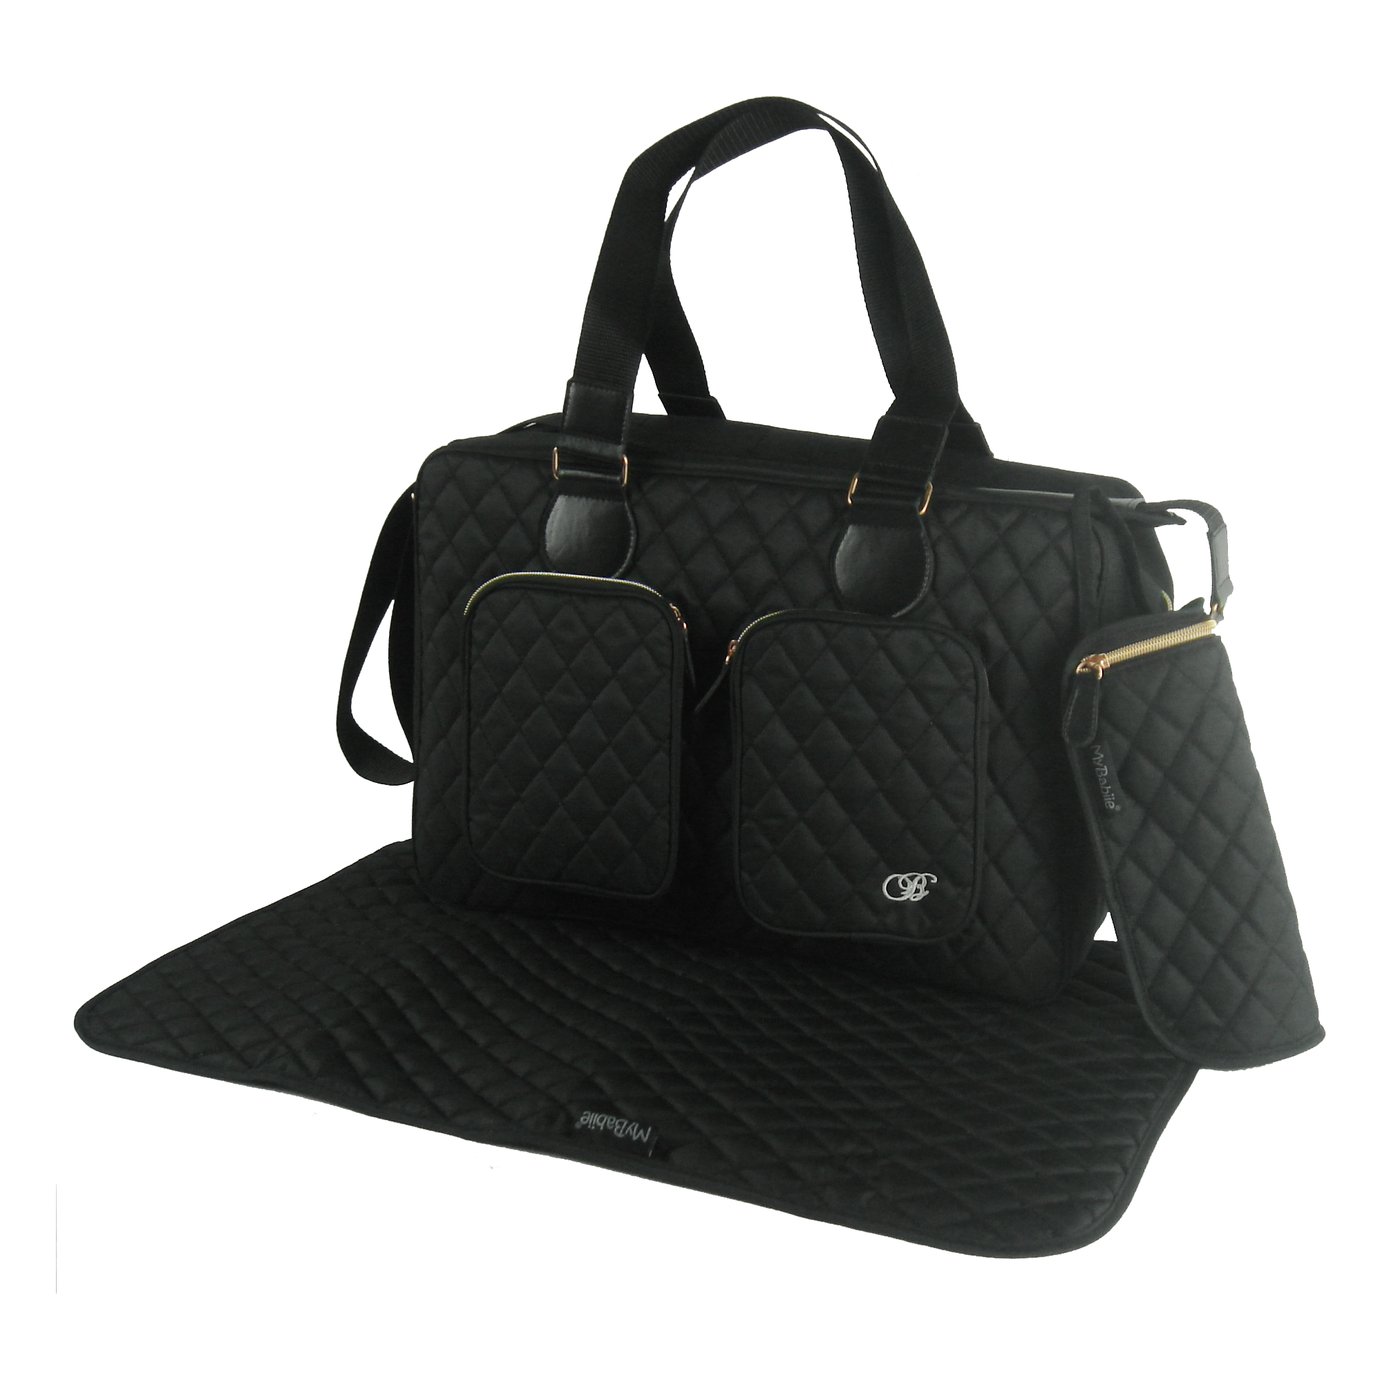 My Babiie Billie Faiers Black Quilted Change Bag